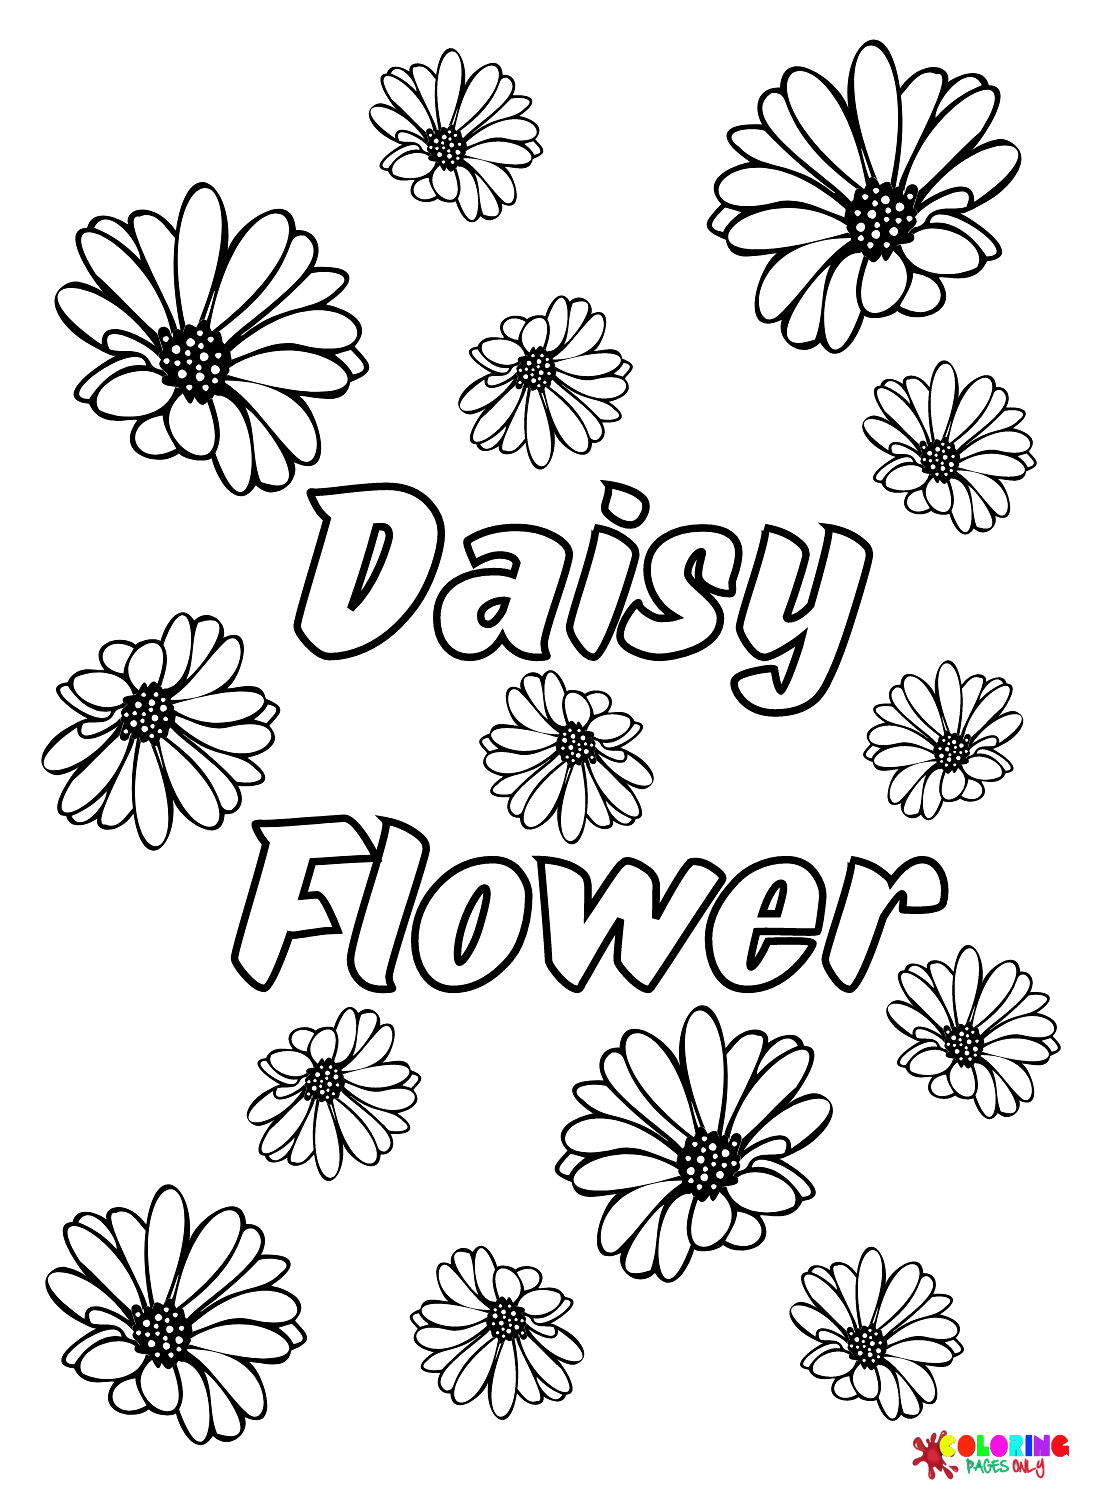 Beautiful Daisy Flower Coloring Page